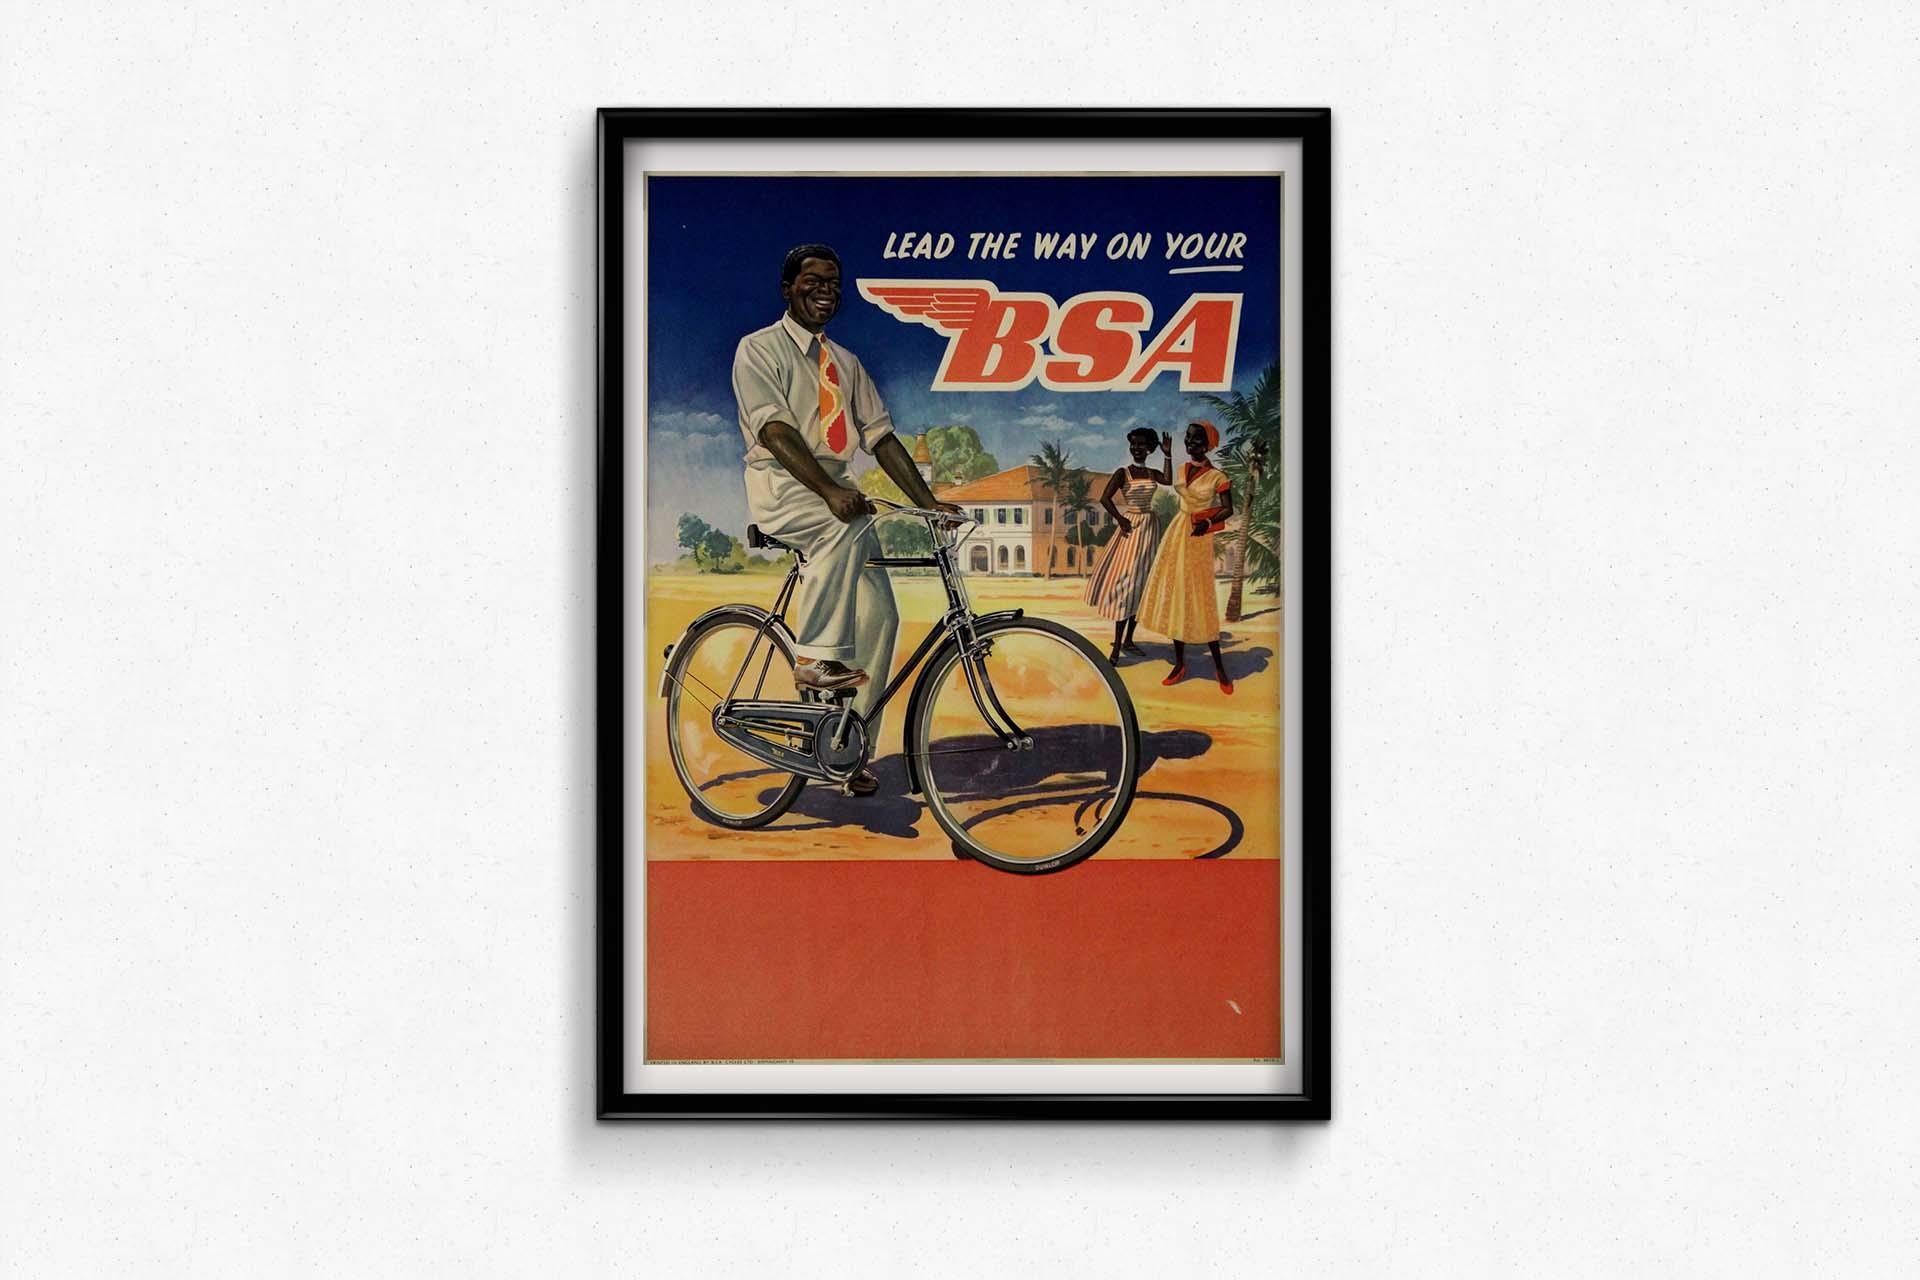 The circa 1940 original poster for BSA bicycles, with its captivating slogan 